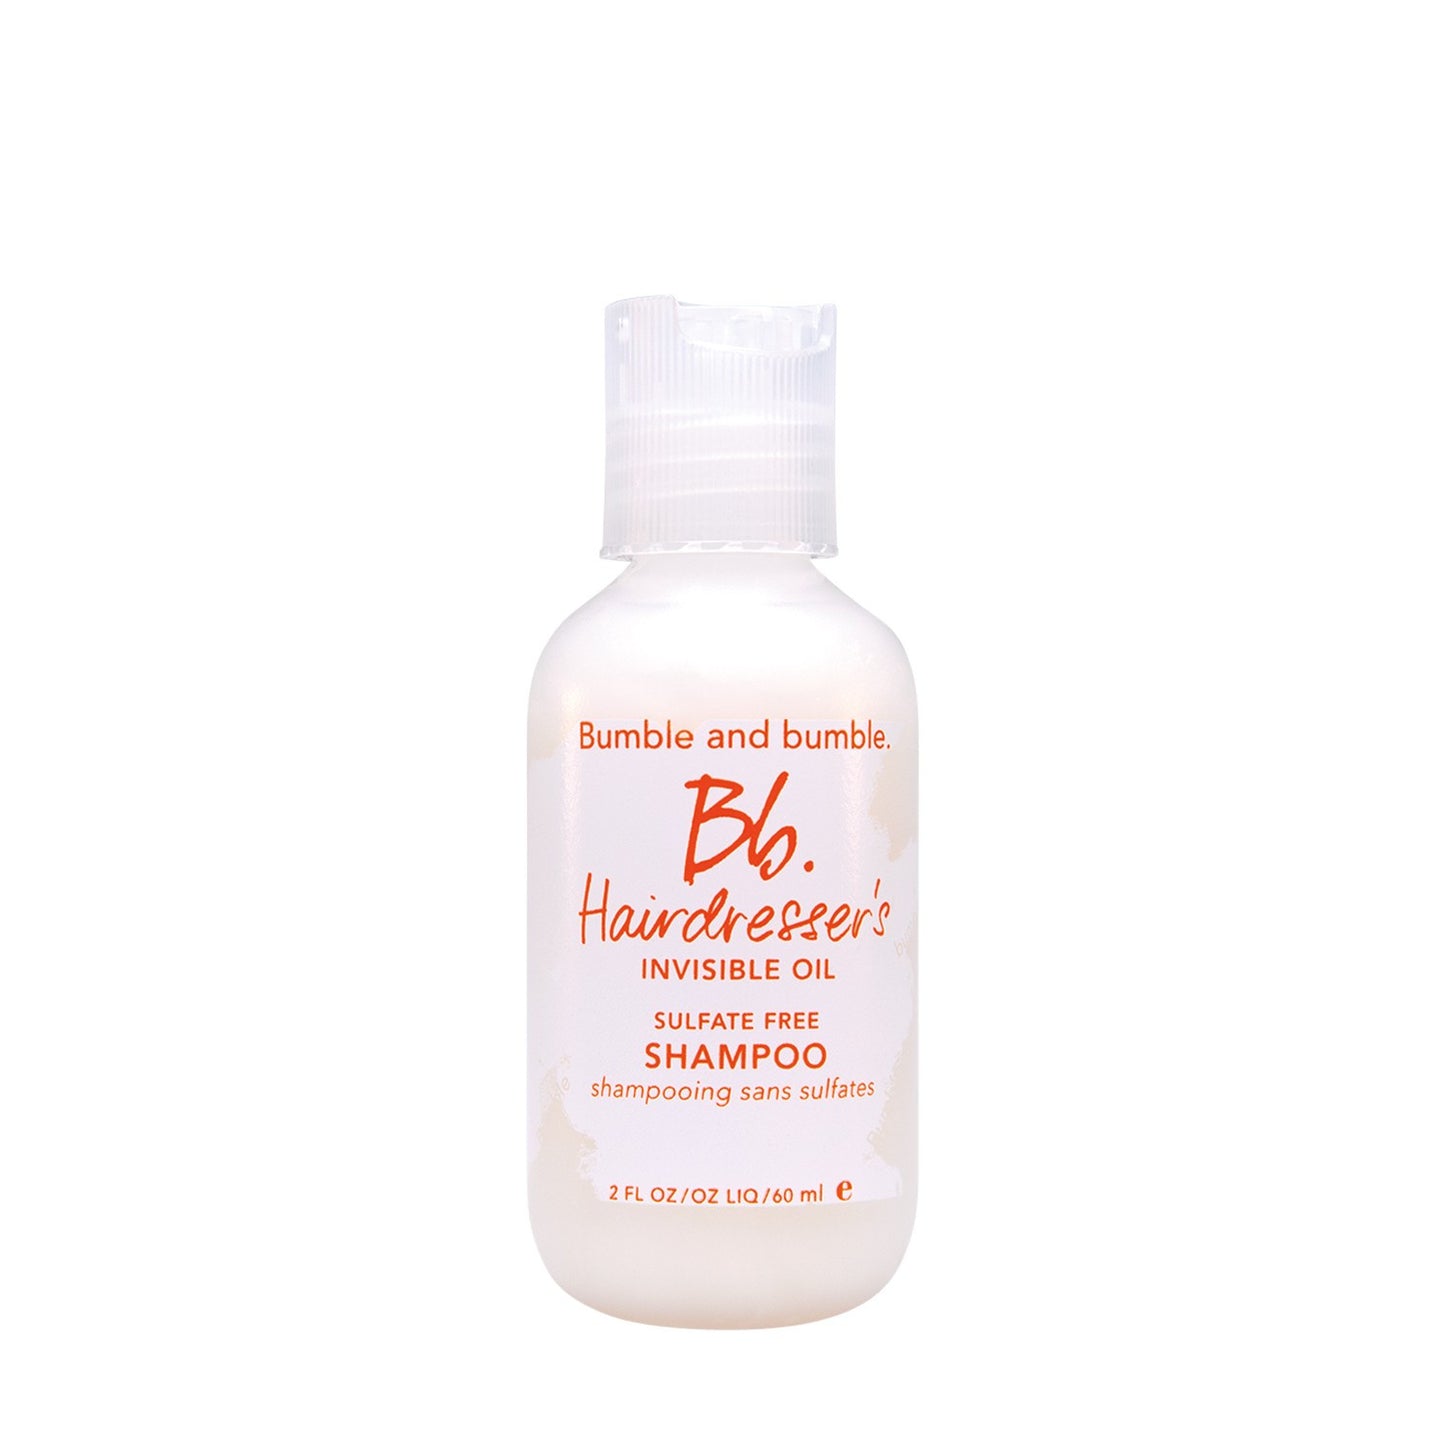 Bumble and Bumble Hairdresser's Invisible Oil Shampoo Travel